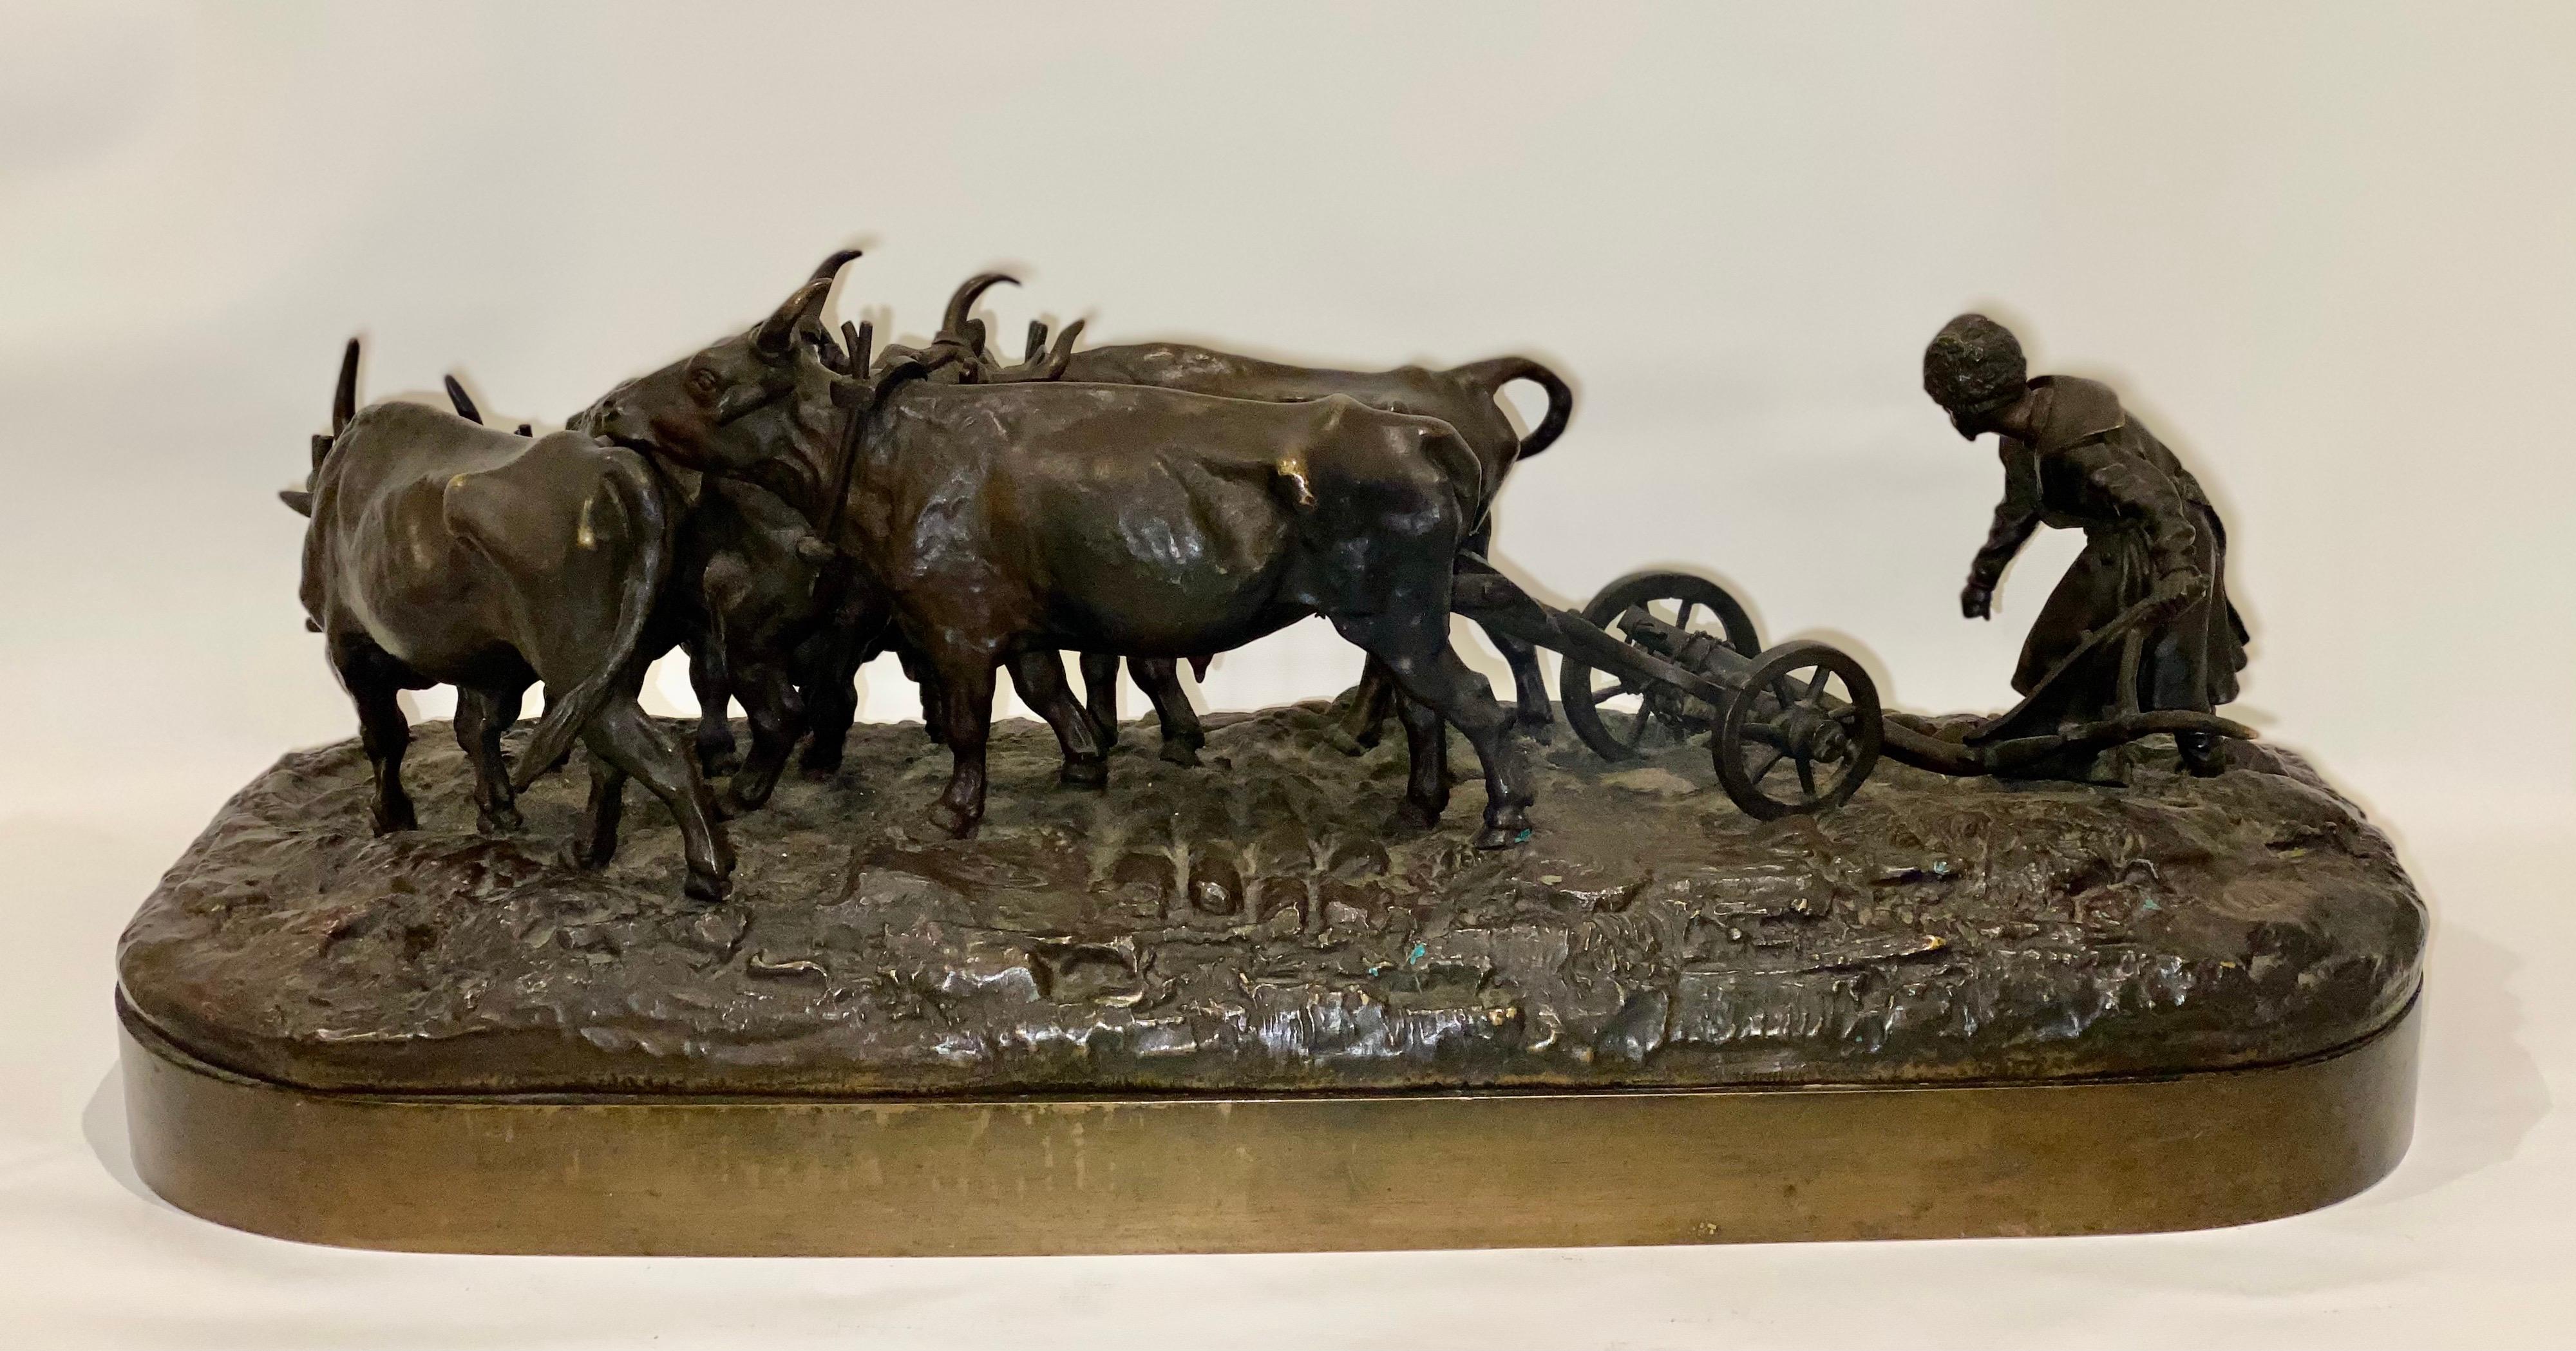 A Large Bronze Group of a Ukrainian (Little Russian) Plow with Four Oxen
Cast by Chopin After the Model by Evgenii Lanceray, 1877
On a naturalistic oval base, realistically cast as two young Chumaks driving a plow with oxen, signed and dated on